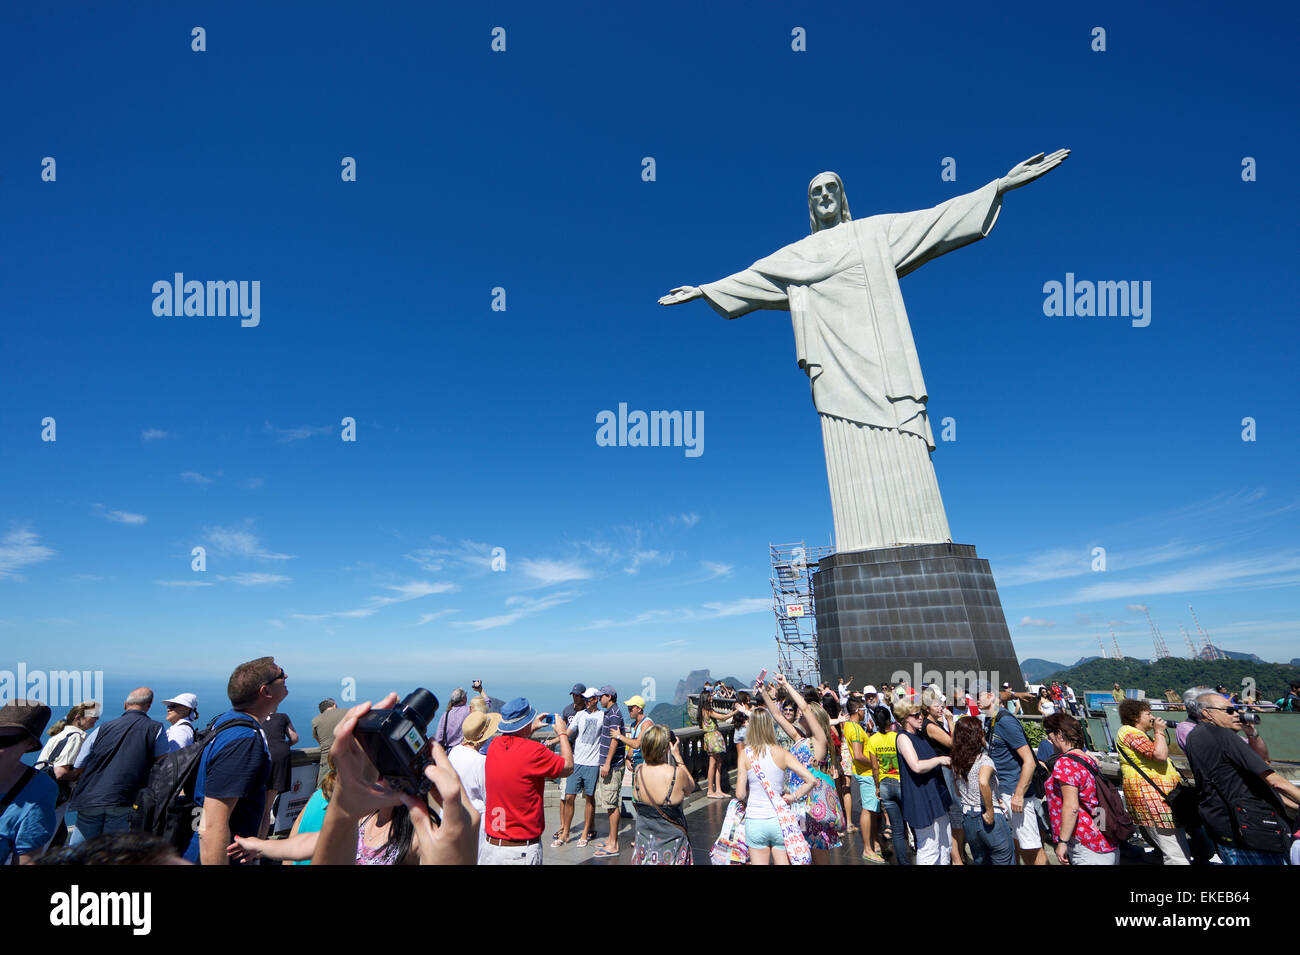 RIO DE JANEIRO, BRAZIL - MARCH 05, 2015: Groups of tourists pose for pictures on a bright morning at Christ the Redeemer. Stock Photo